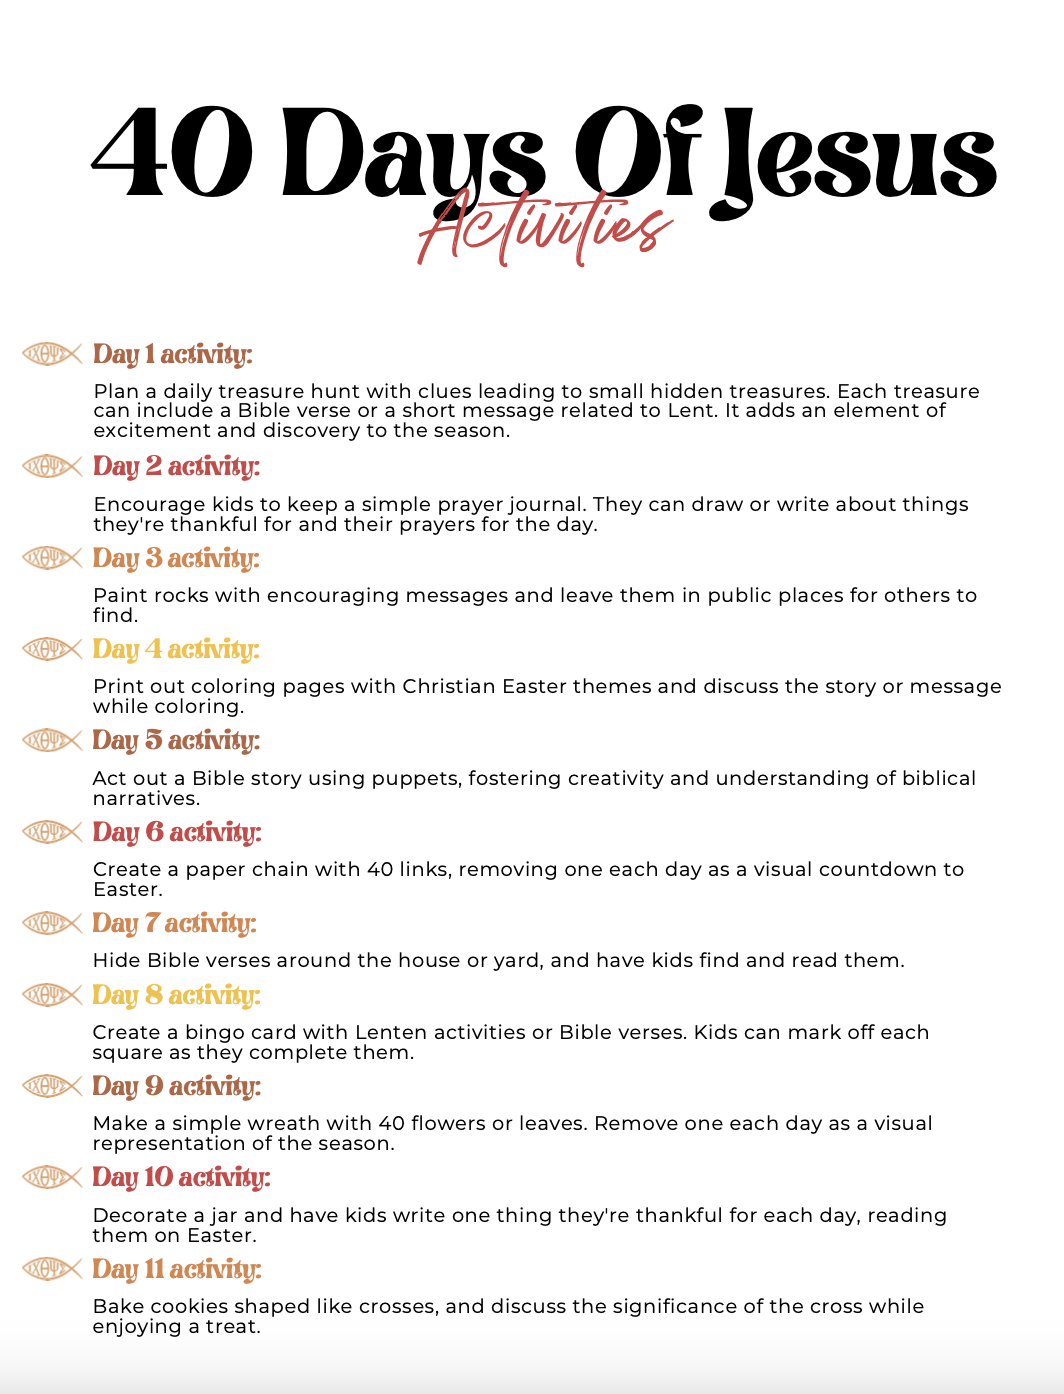 40 Days of Jesus – An Inspirational Lent Scripture Reading & Activity Set Perfect for Easter Season